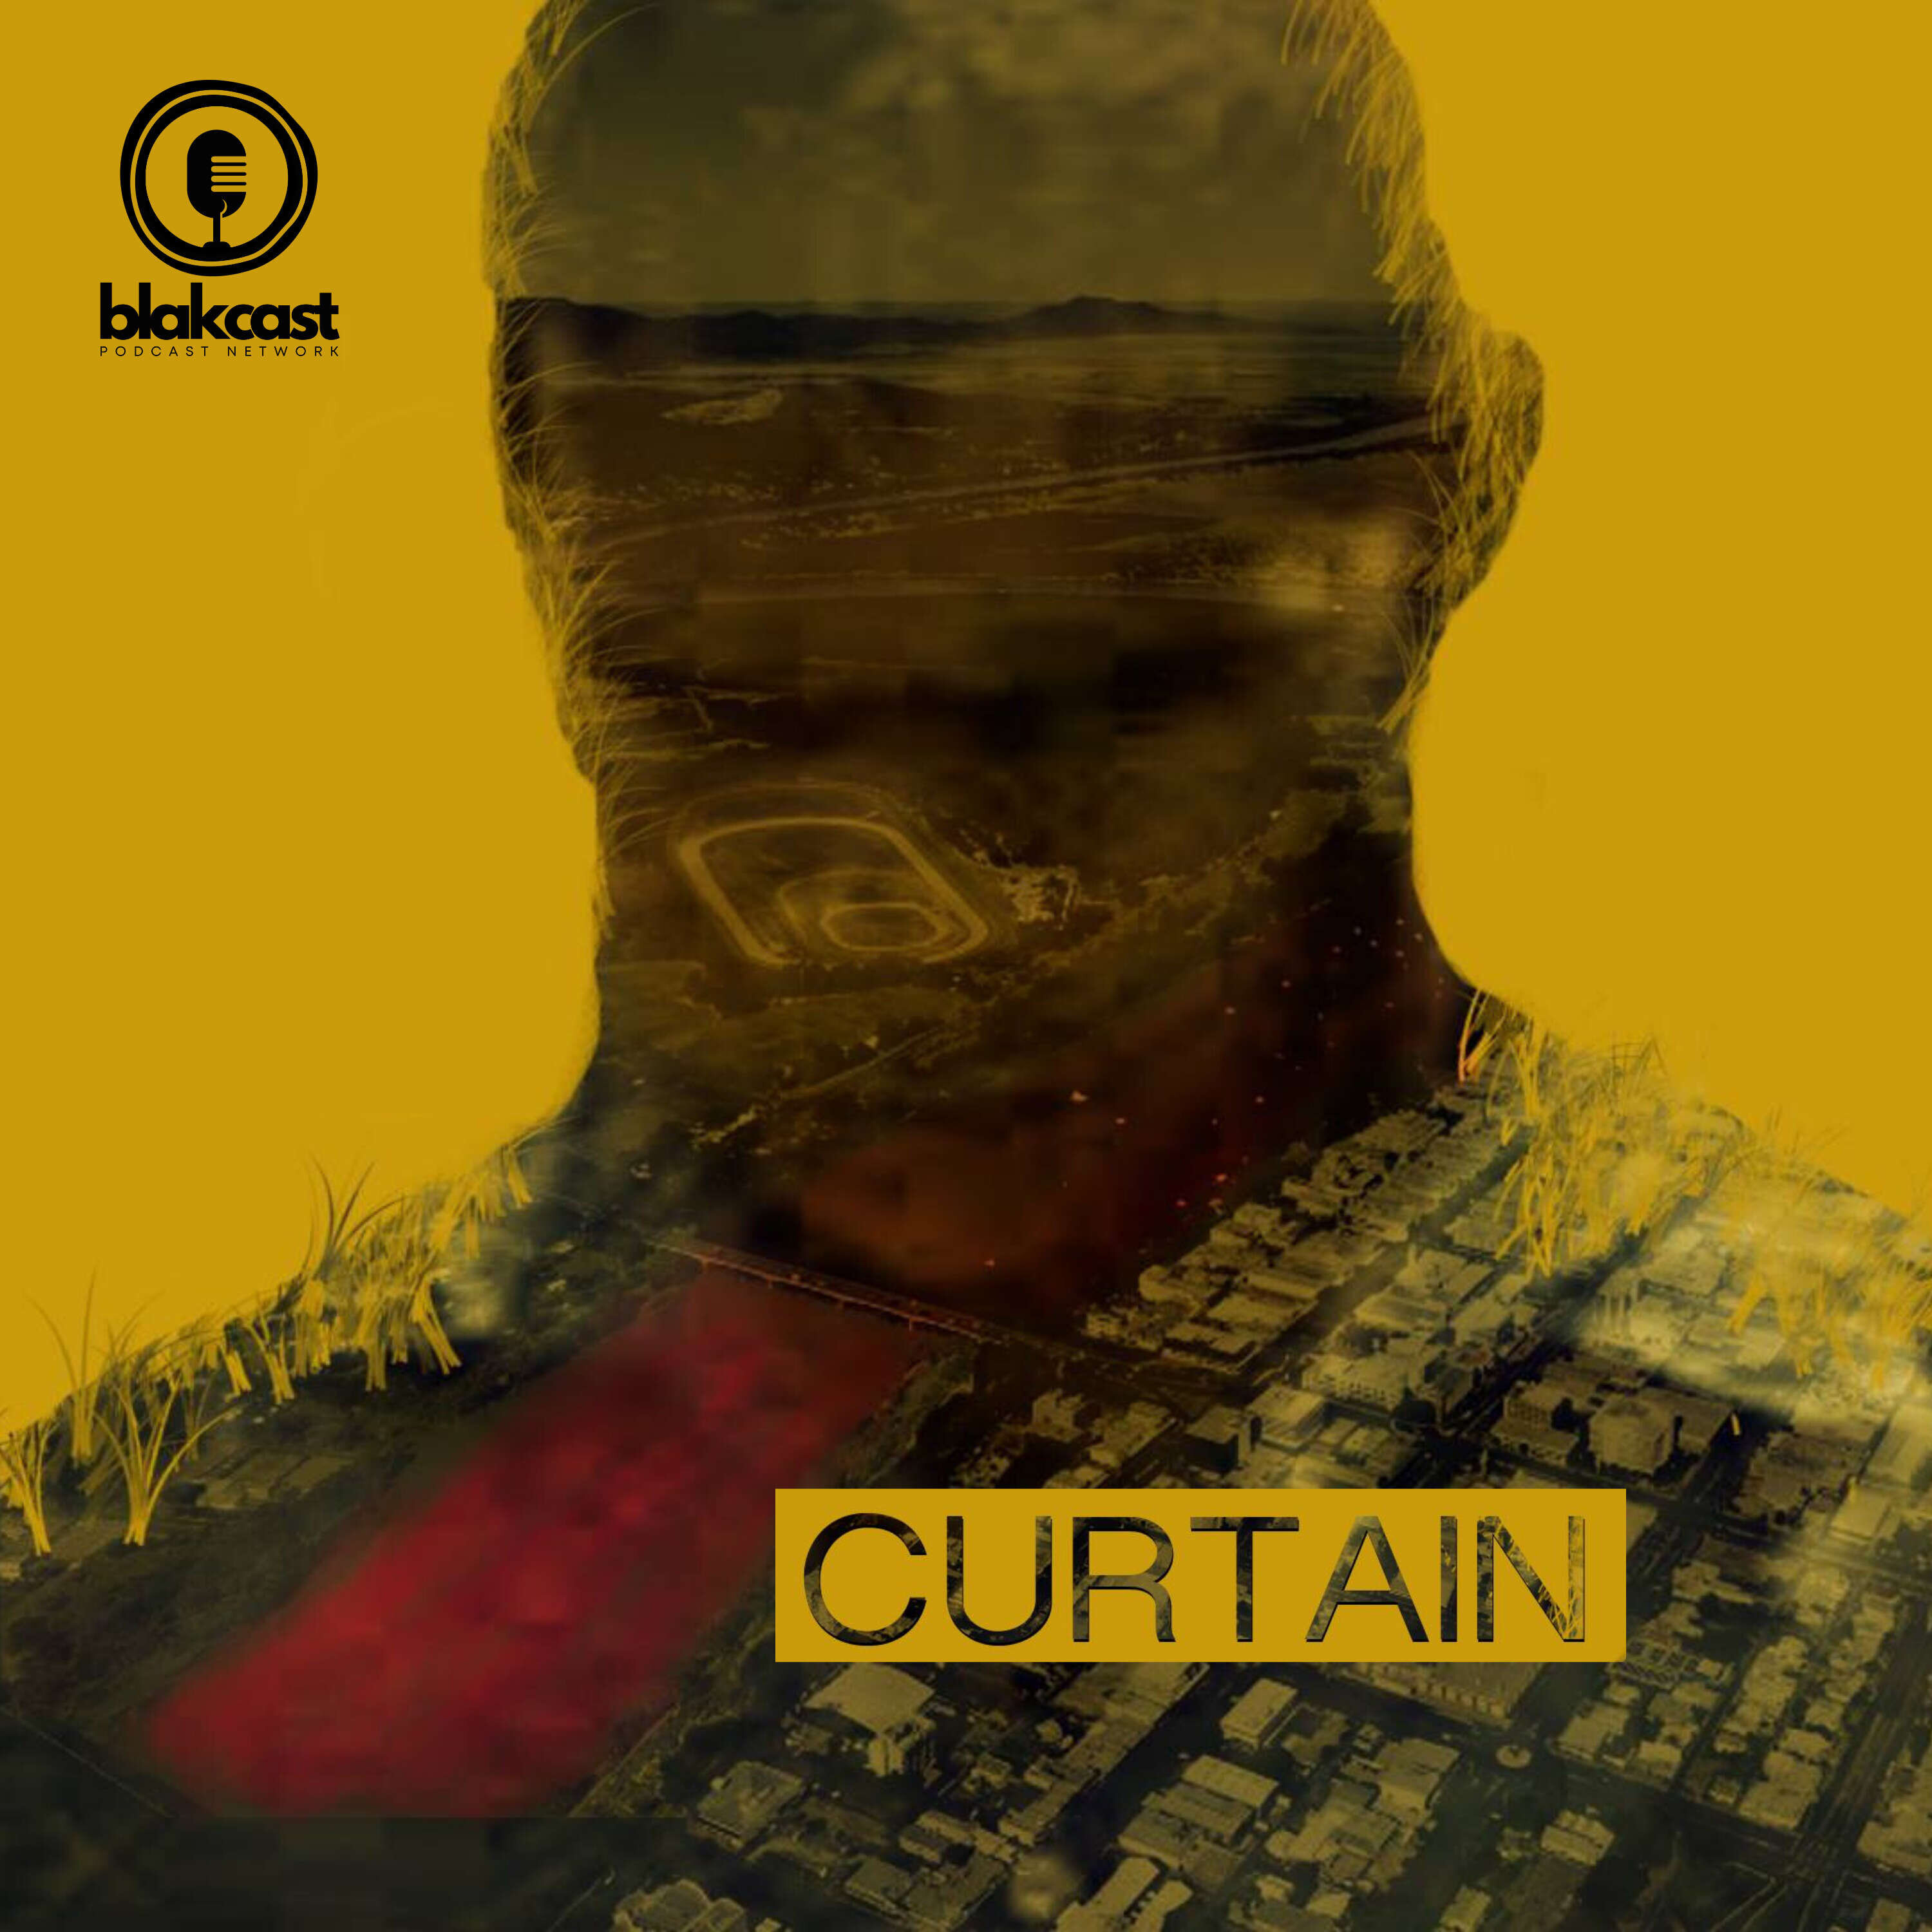 Curtain The Podcast:CurtainThePodcast